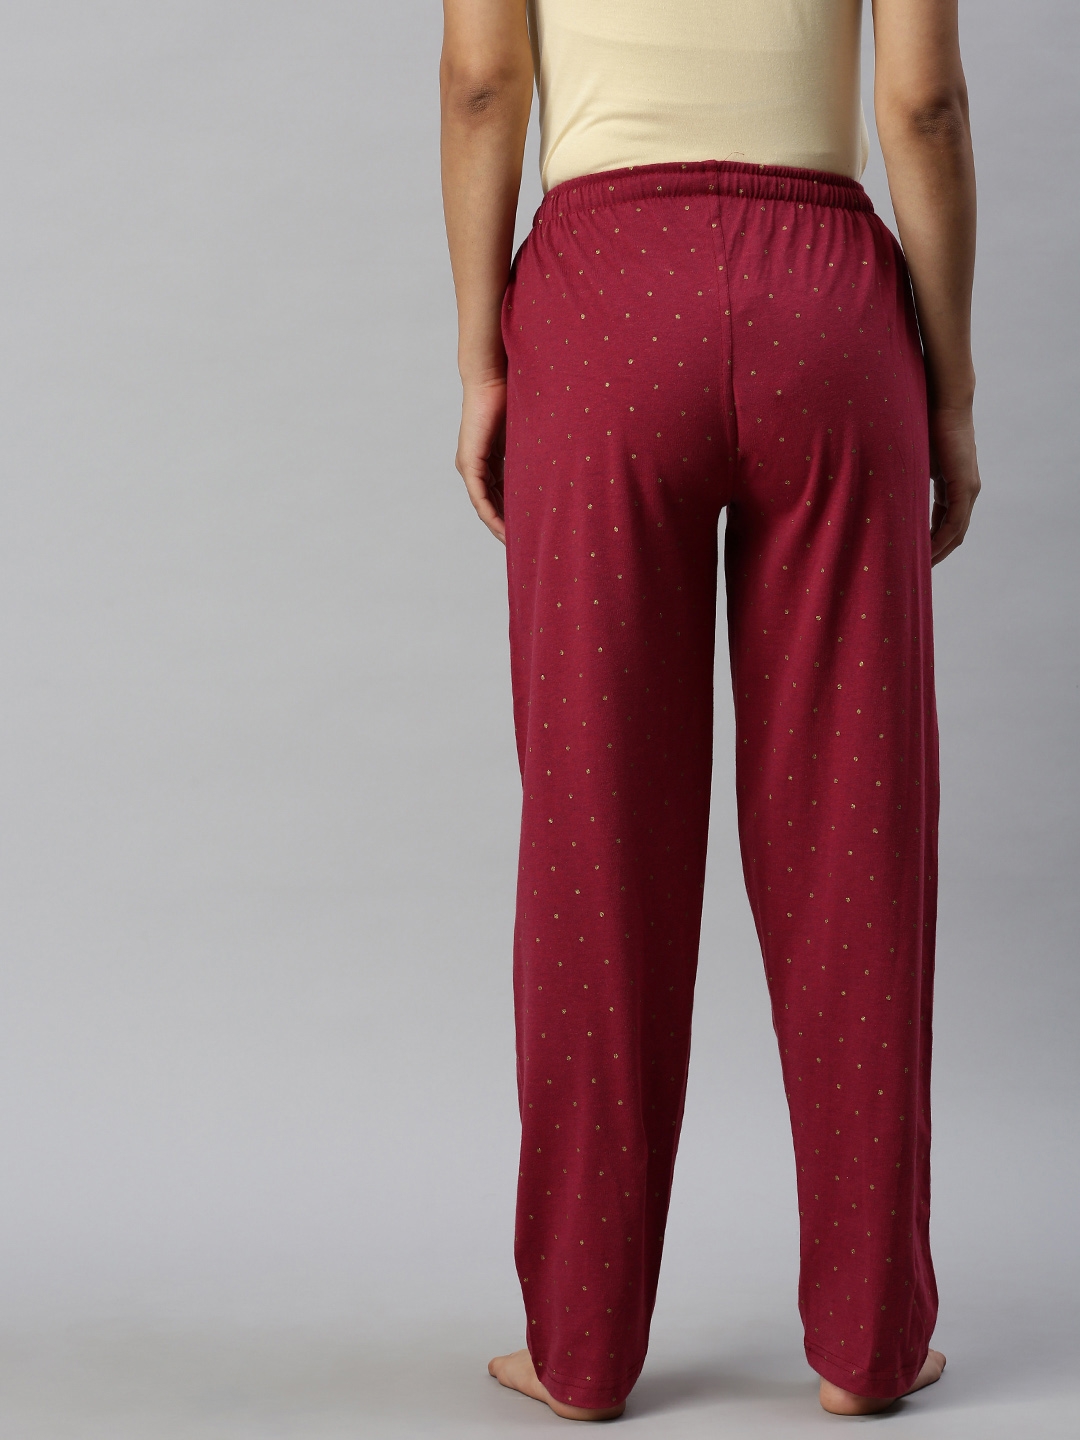 Kryptic | Kryptic Womens 100% Cotton Full Length Lounge Pants - Pack of 2 5